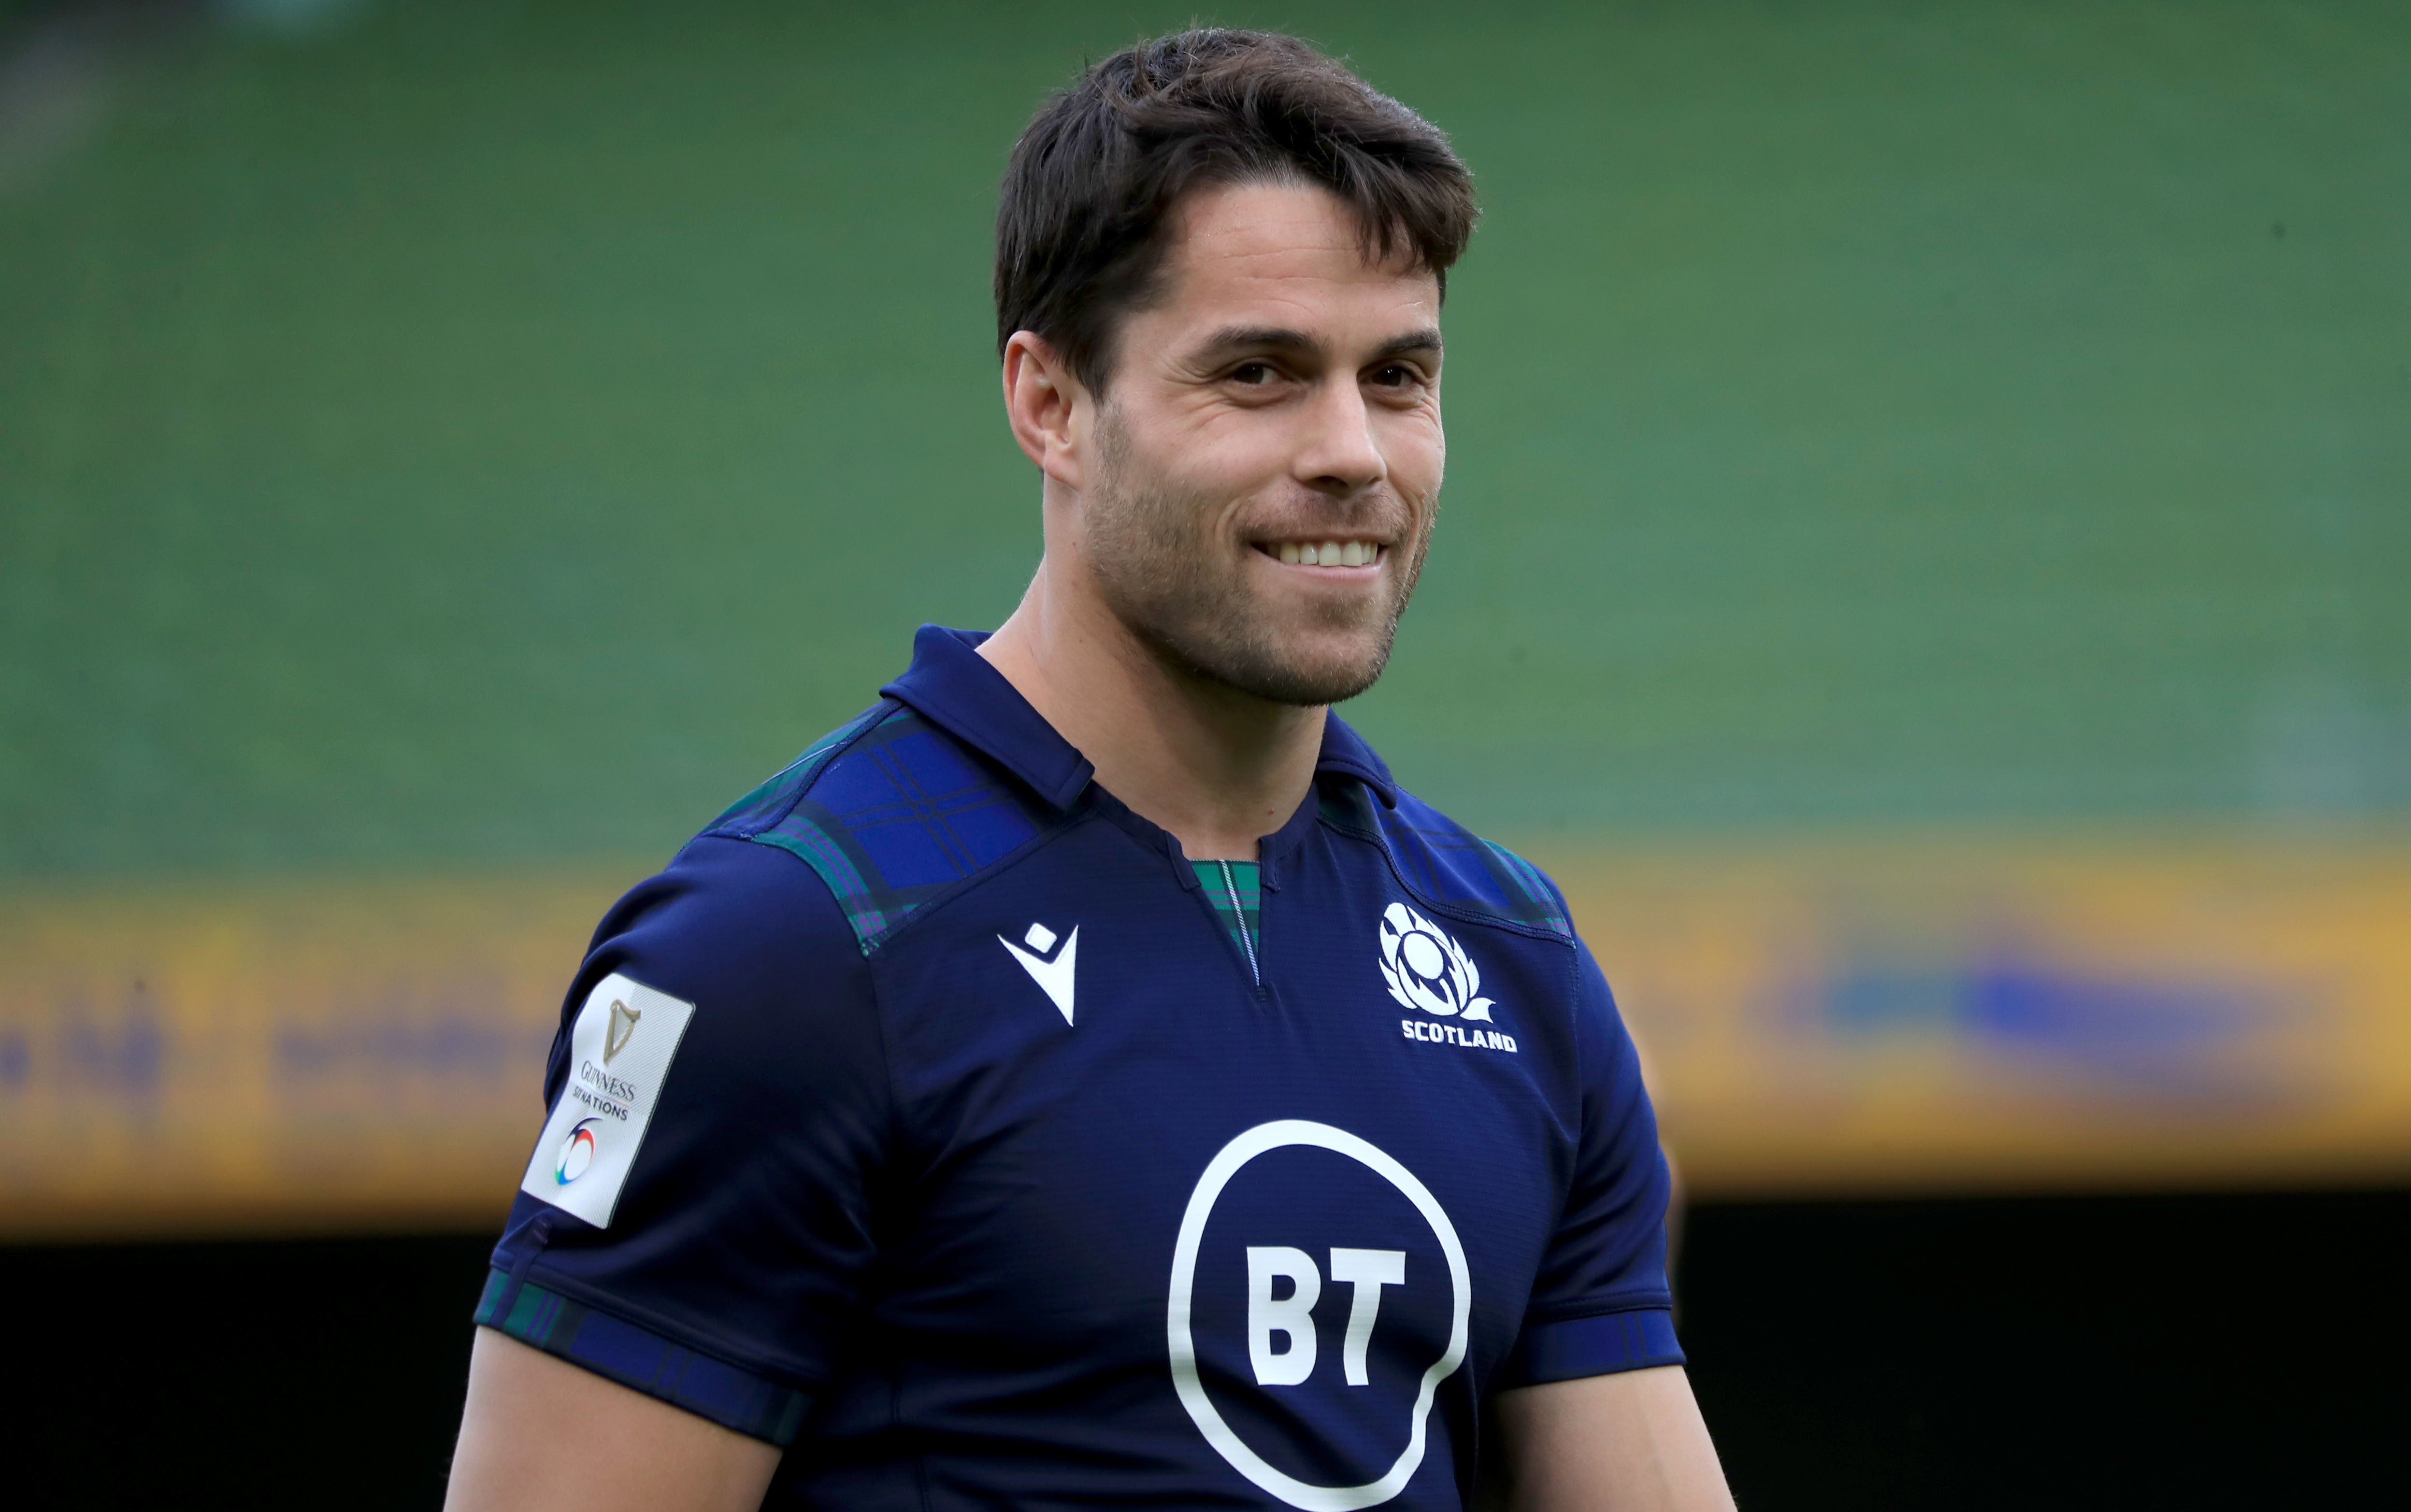 Sean Maitland will not play in Scotland’s final Six Nations game against Wales